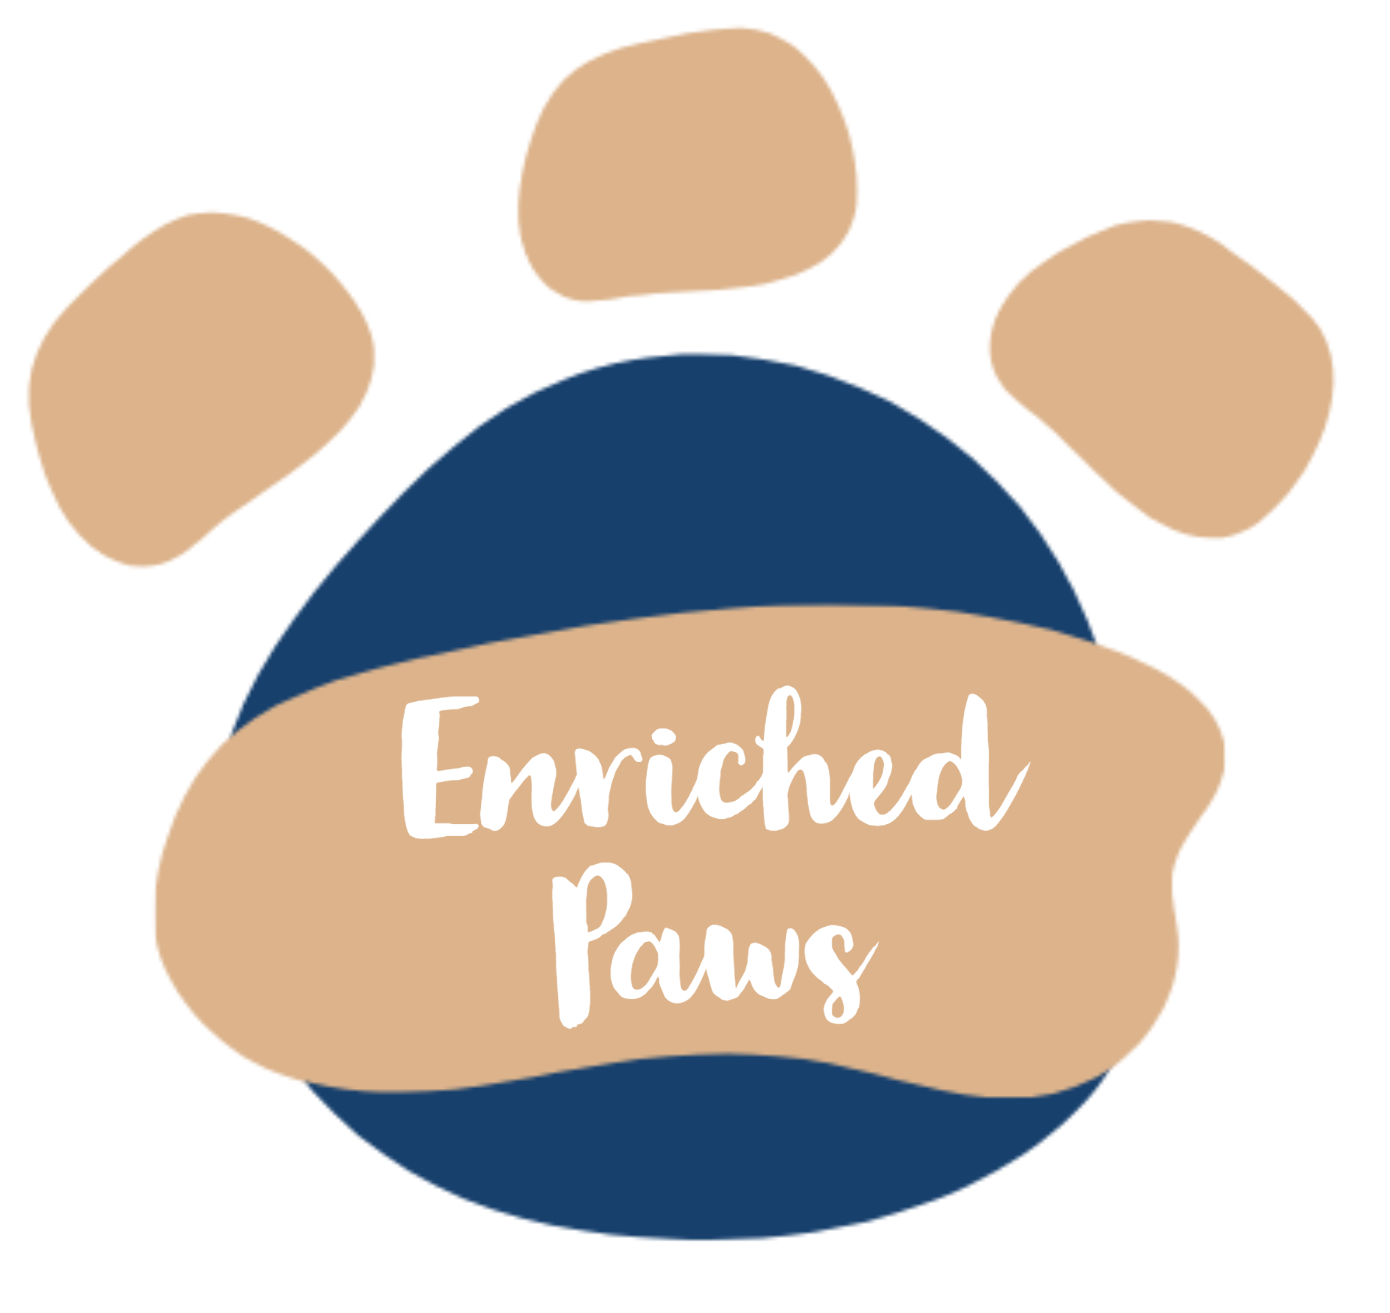 Enriched Paws